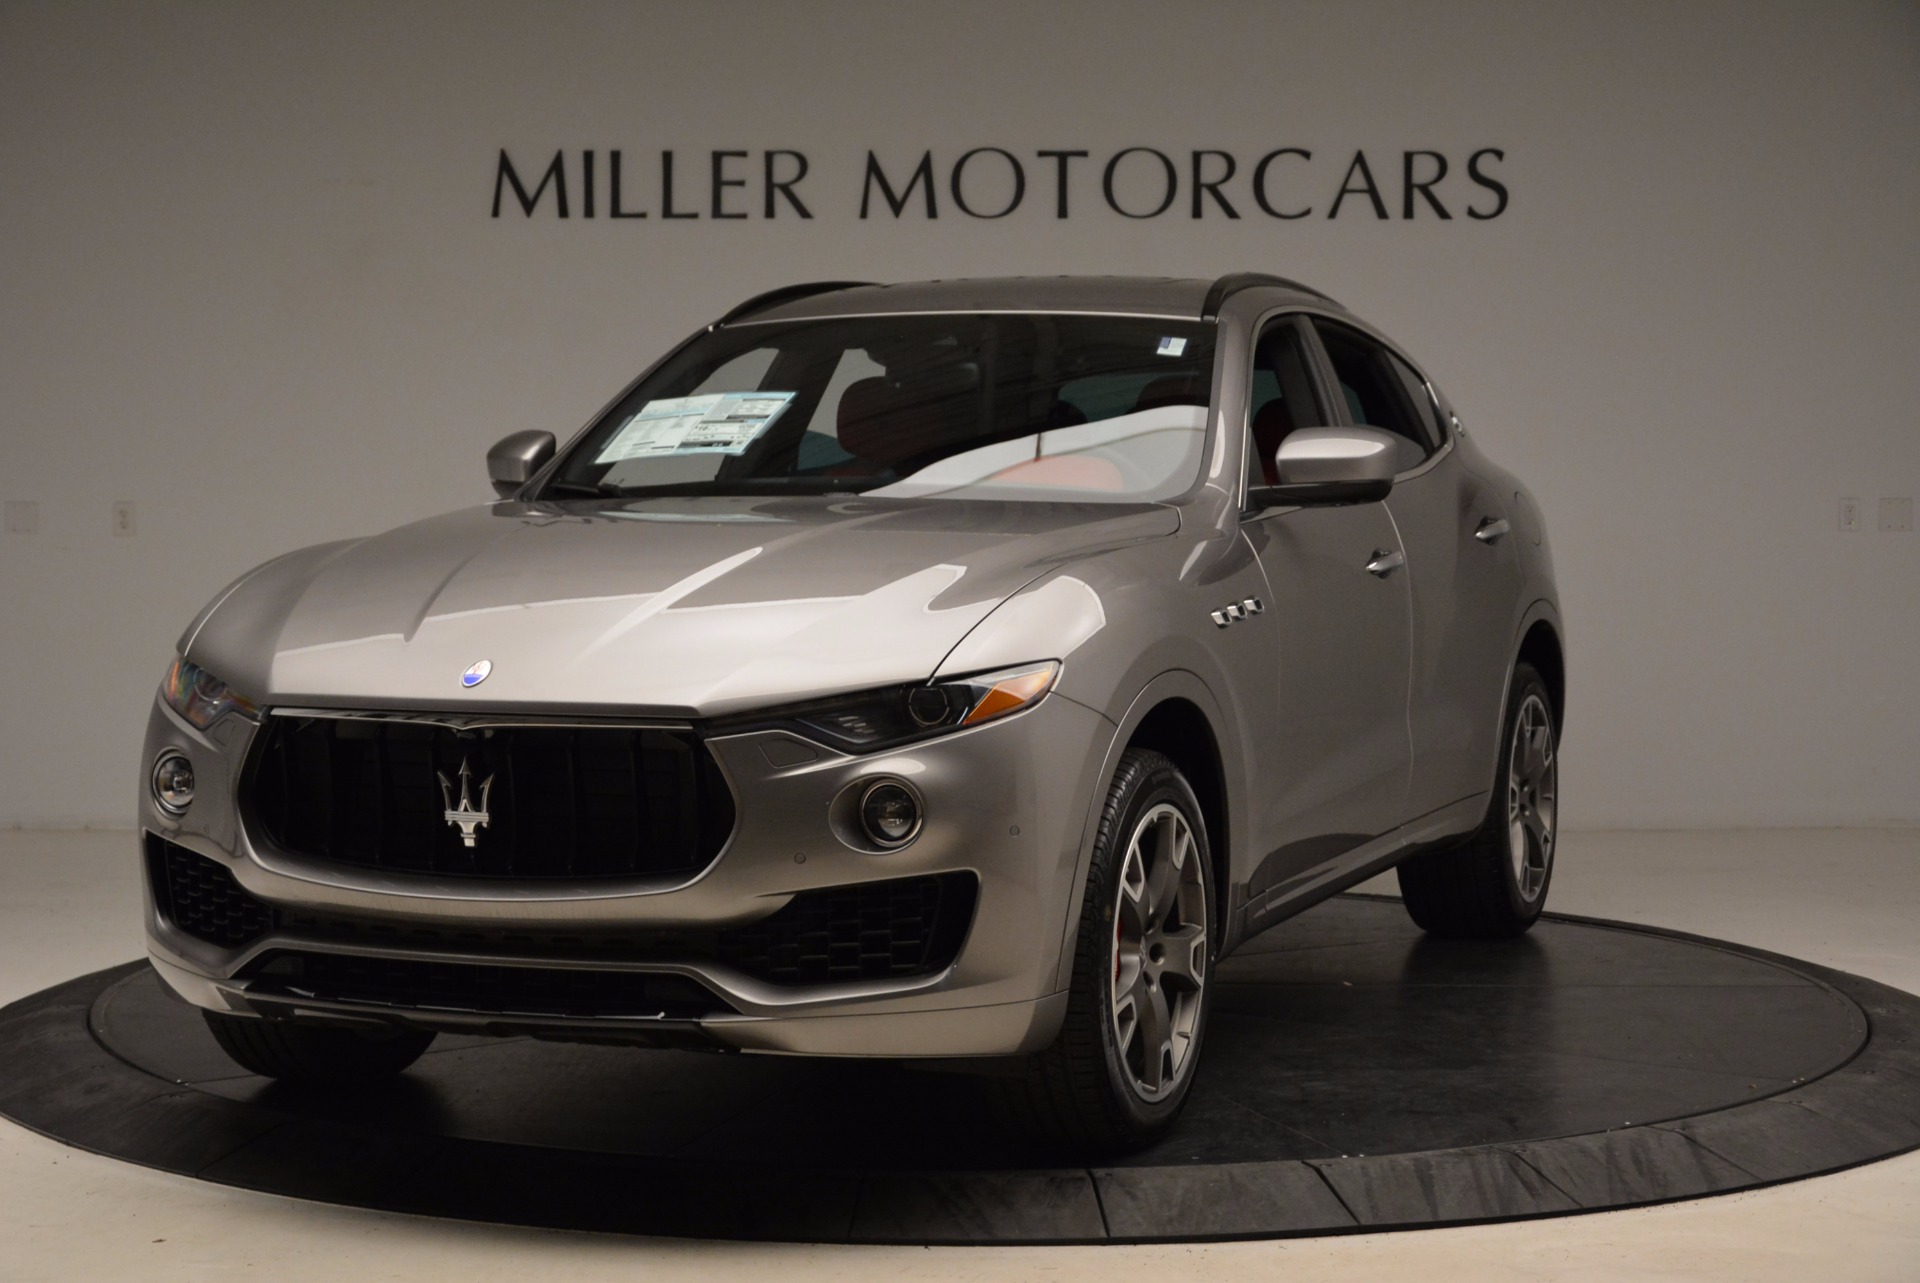 New 2017 Maserati Levante S Q4 for sale Sold at Bentley Greenwich in Greenwich CT 06830 1